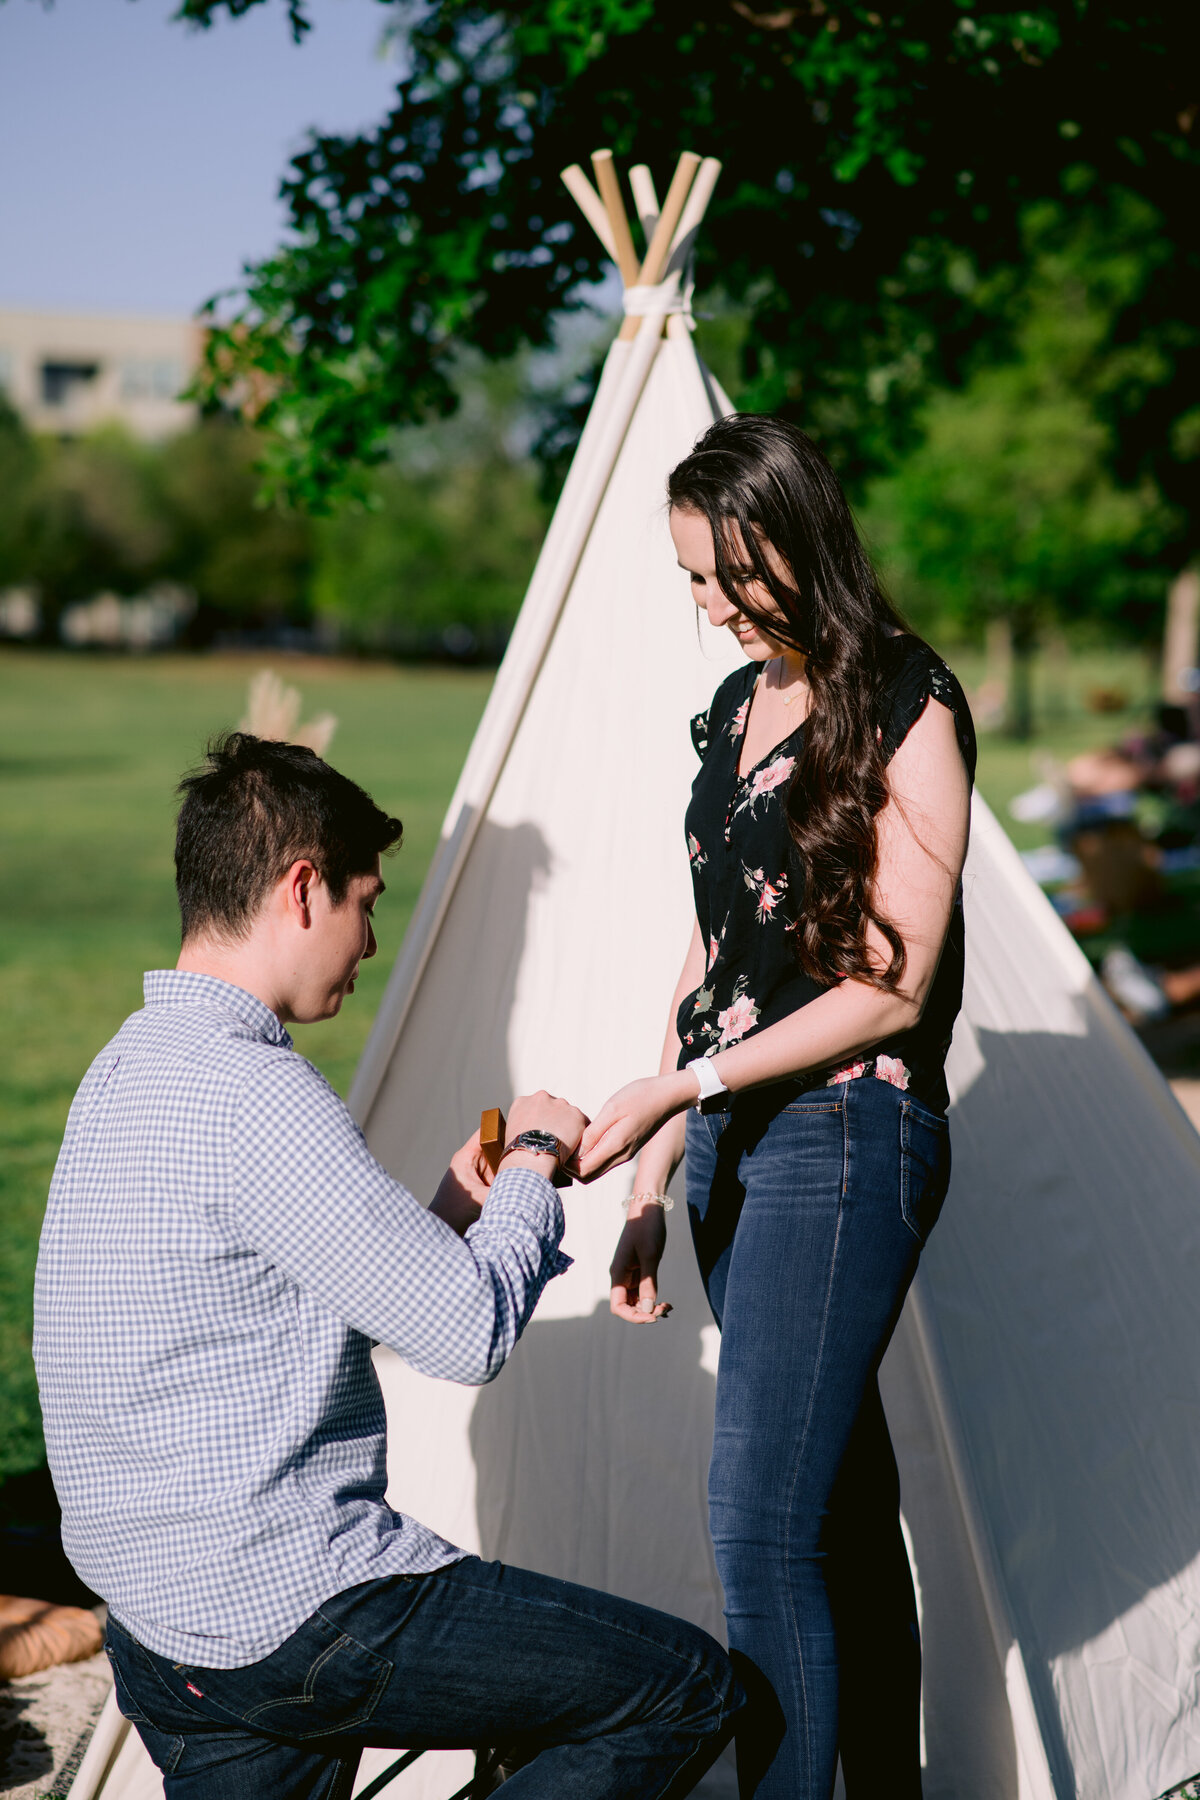 Proposal ideas in Austin man on one knee putting ring on woman's finger